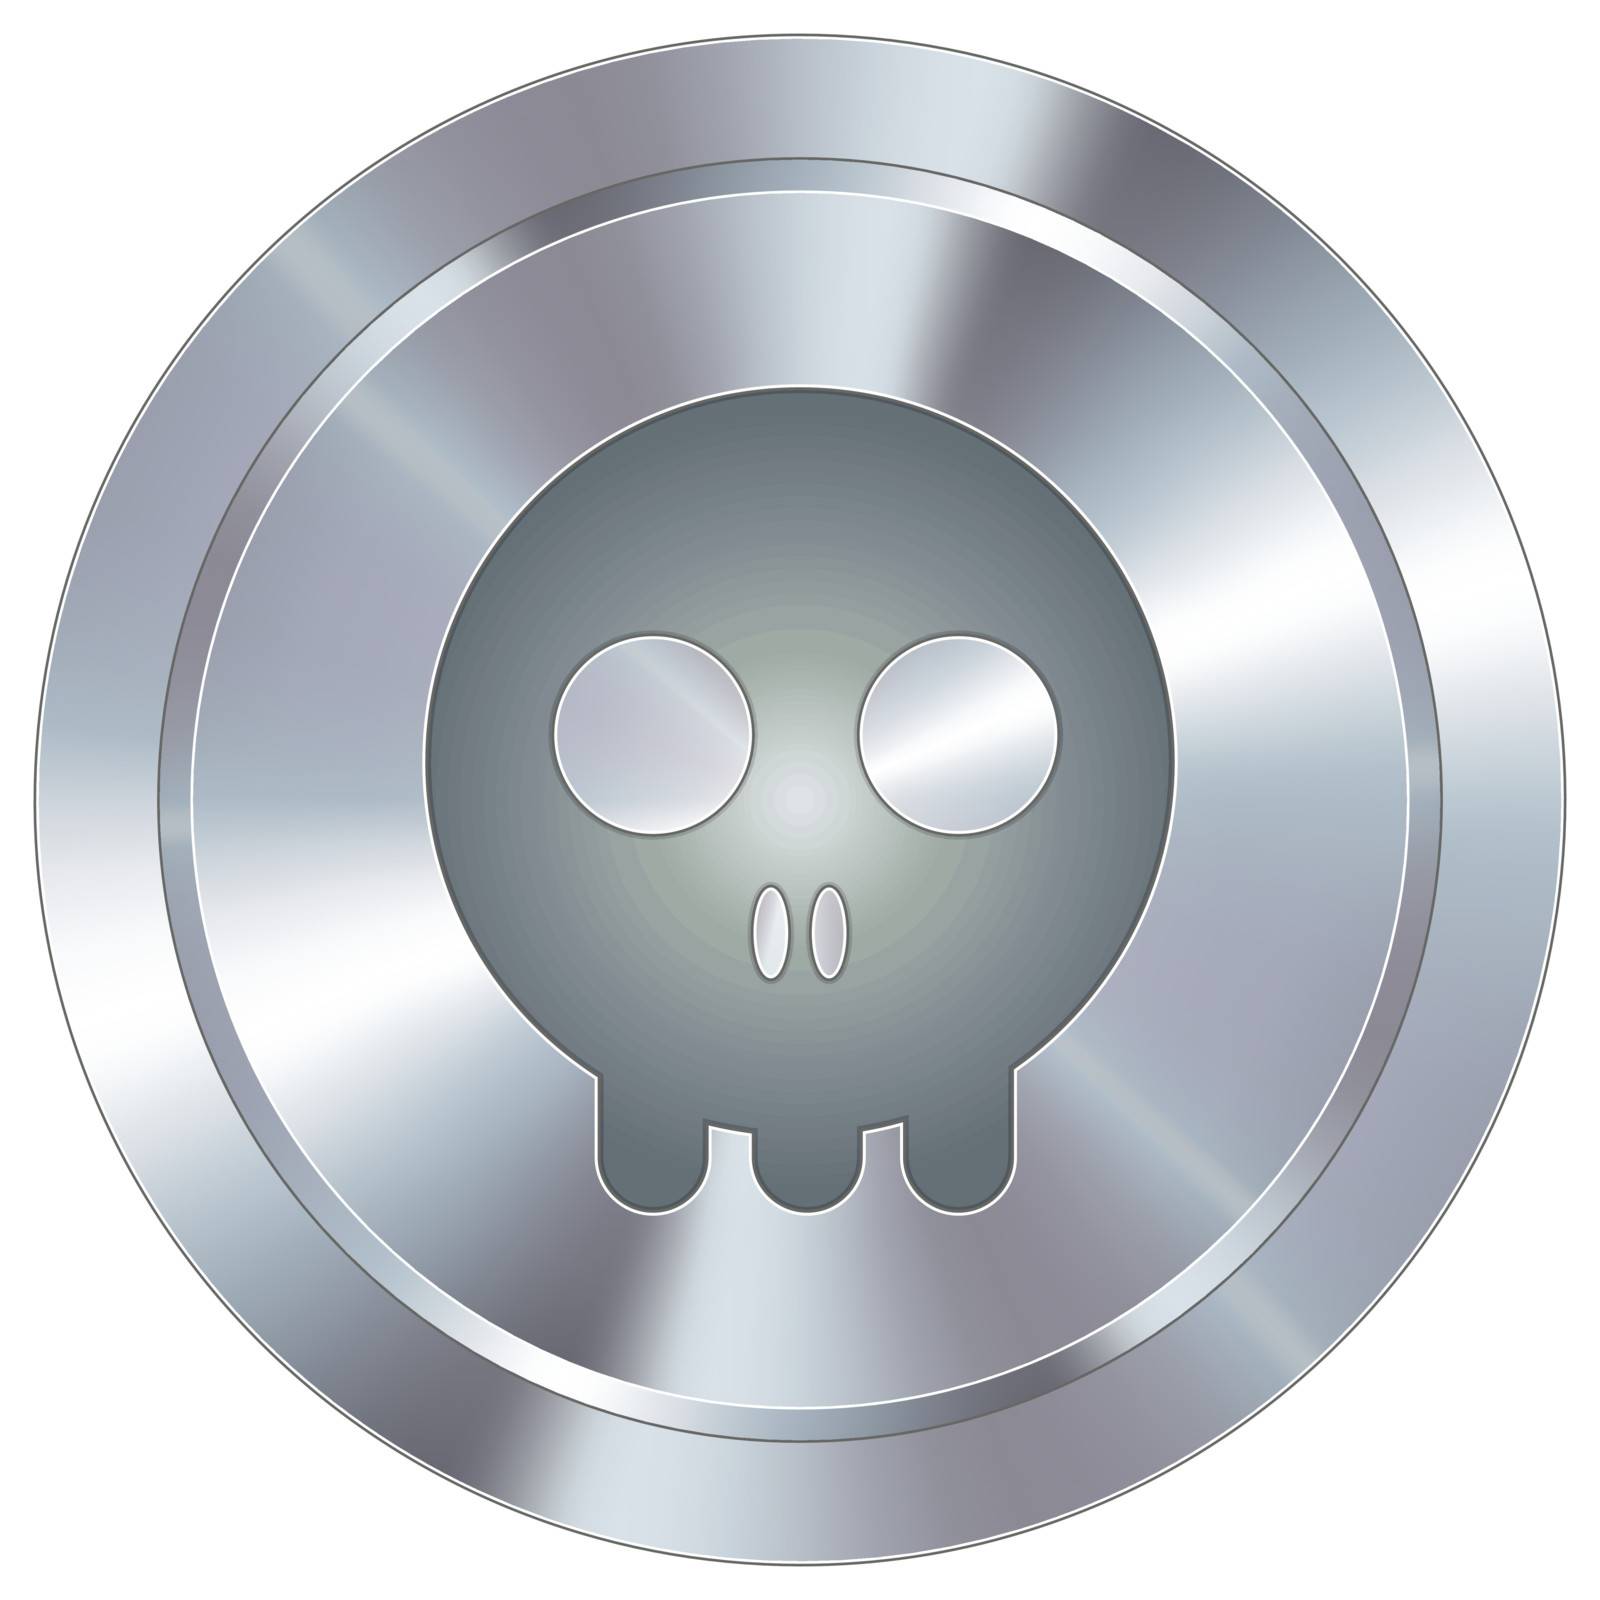 Skull industrial button by lhfgraphics